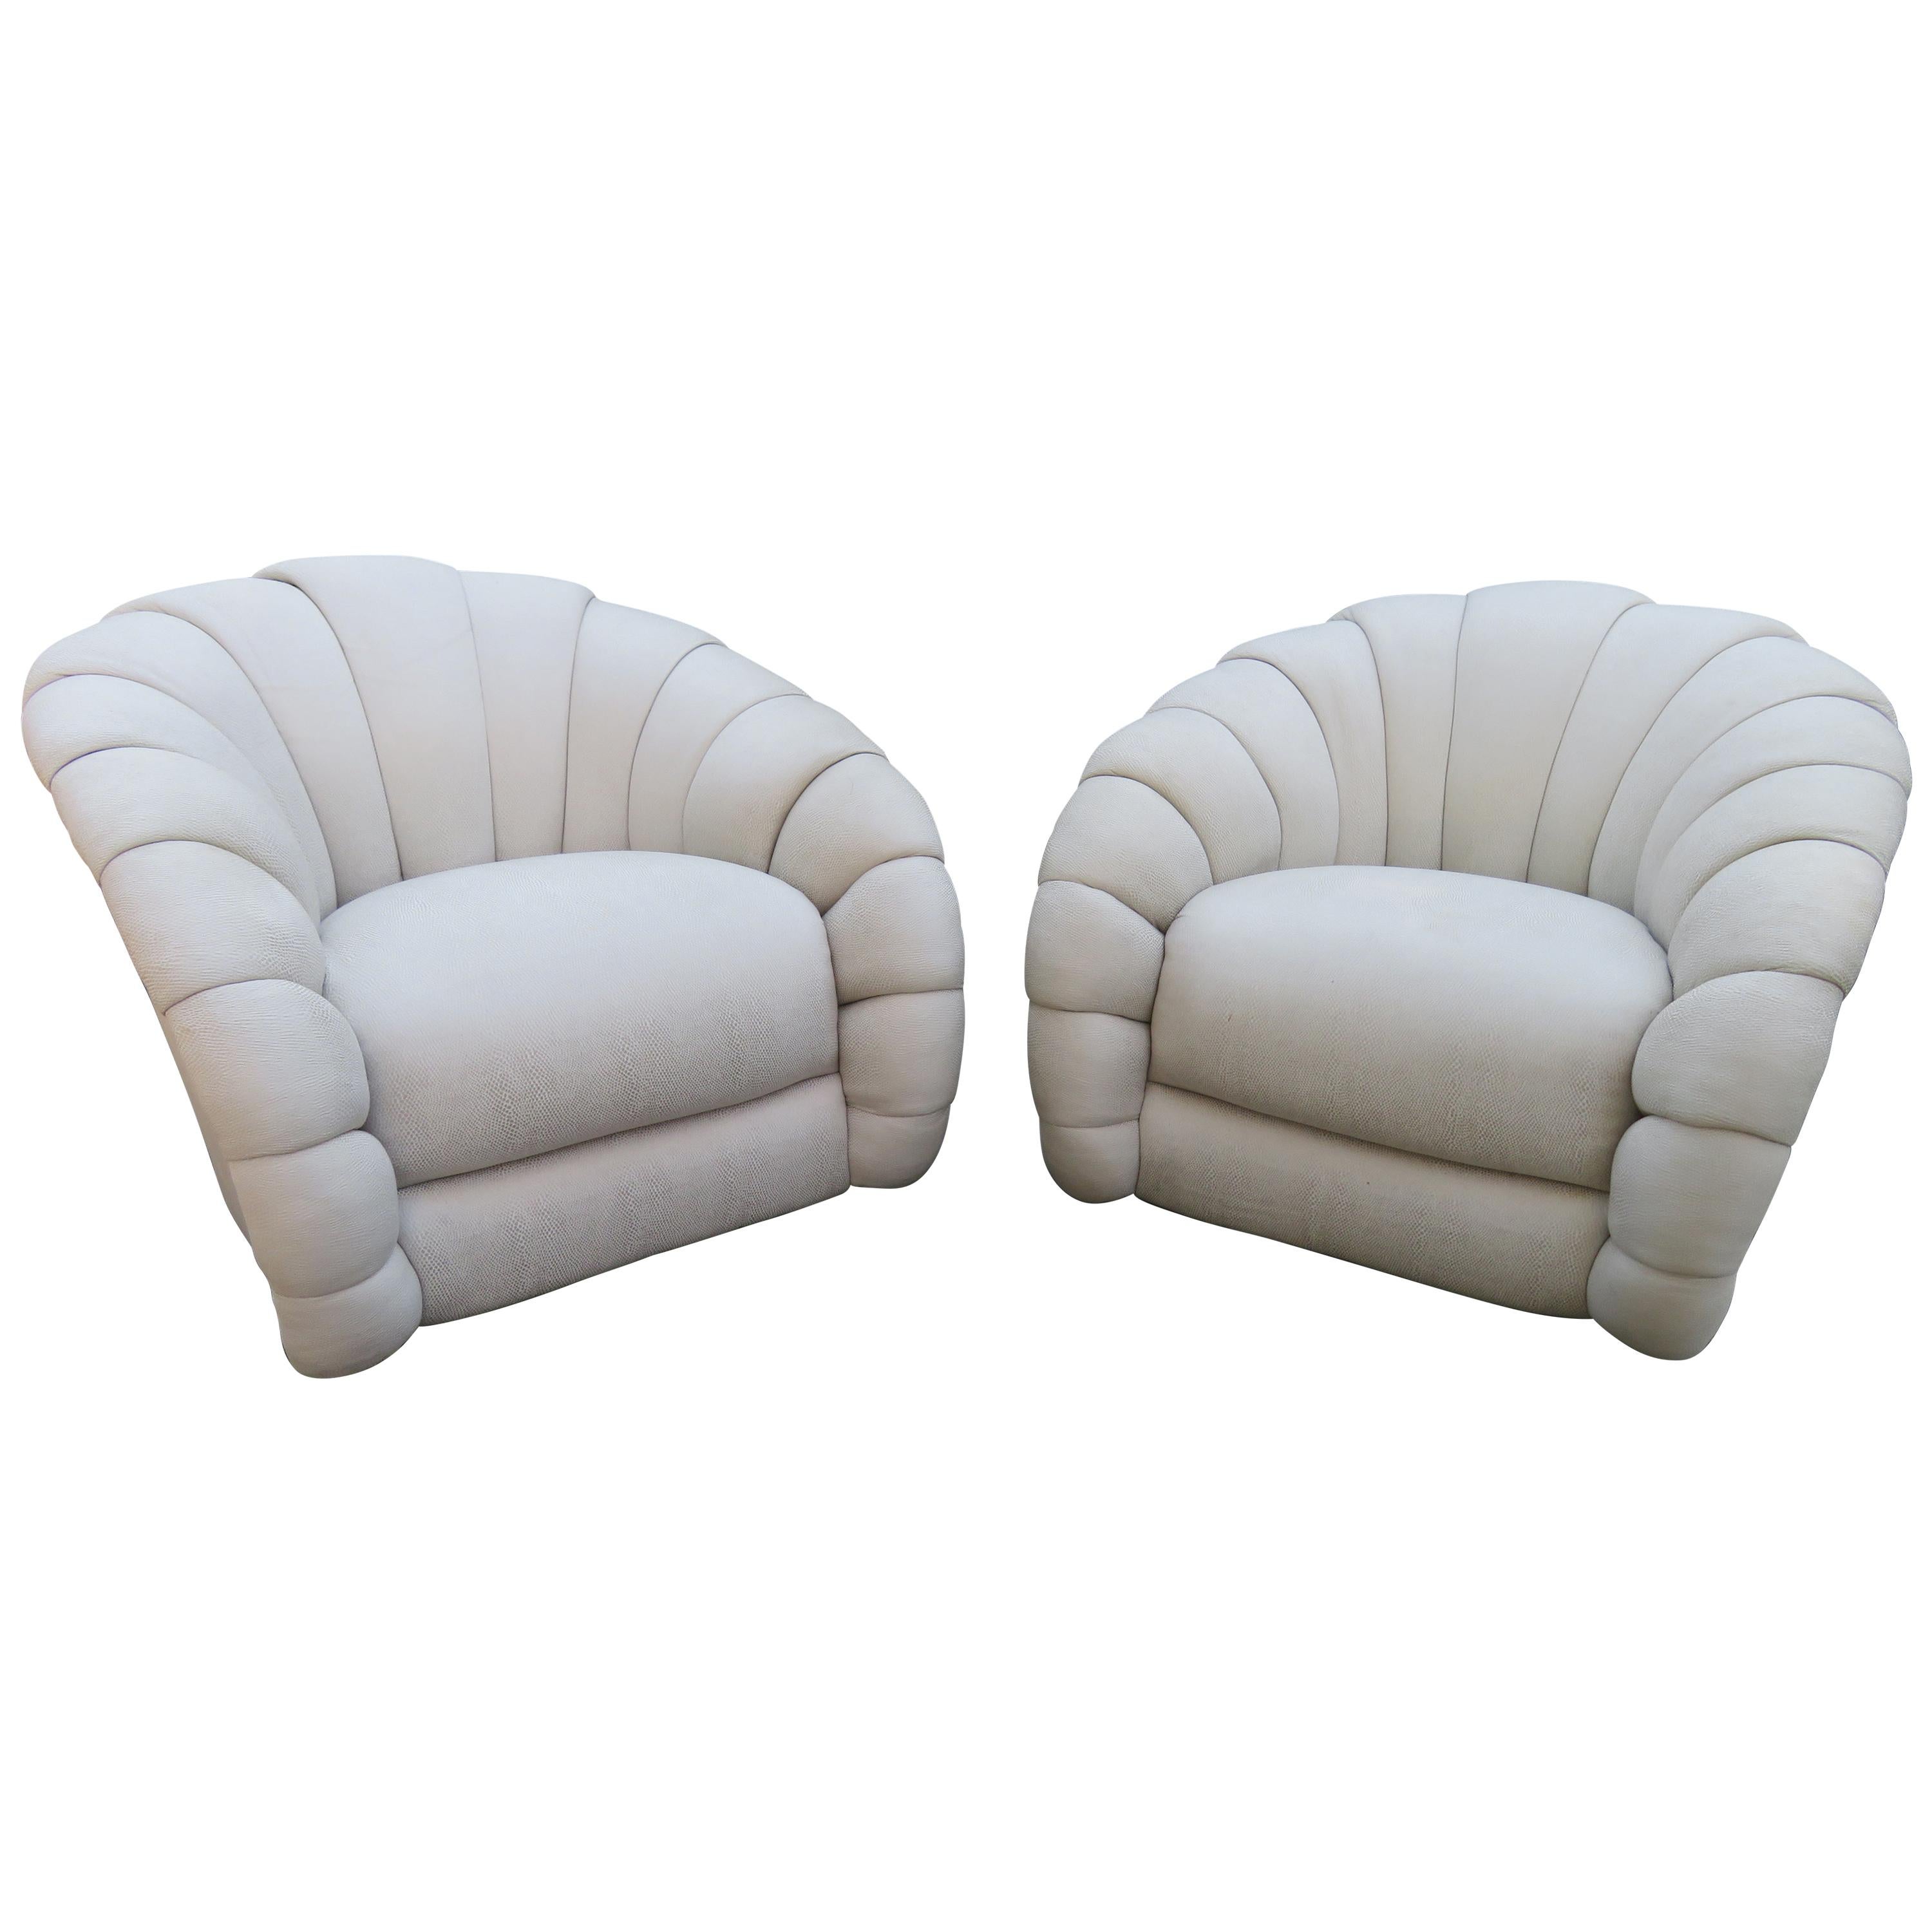 Stunning Pair of Directional Croissant Swivel Lounge Chair Mid-Century